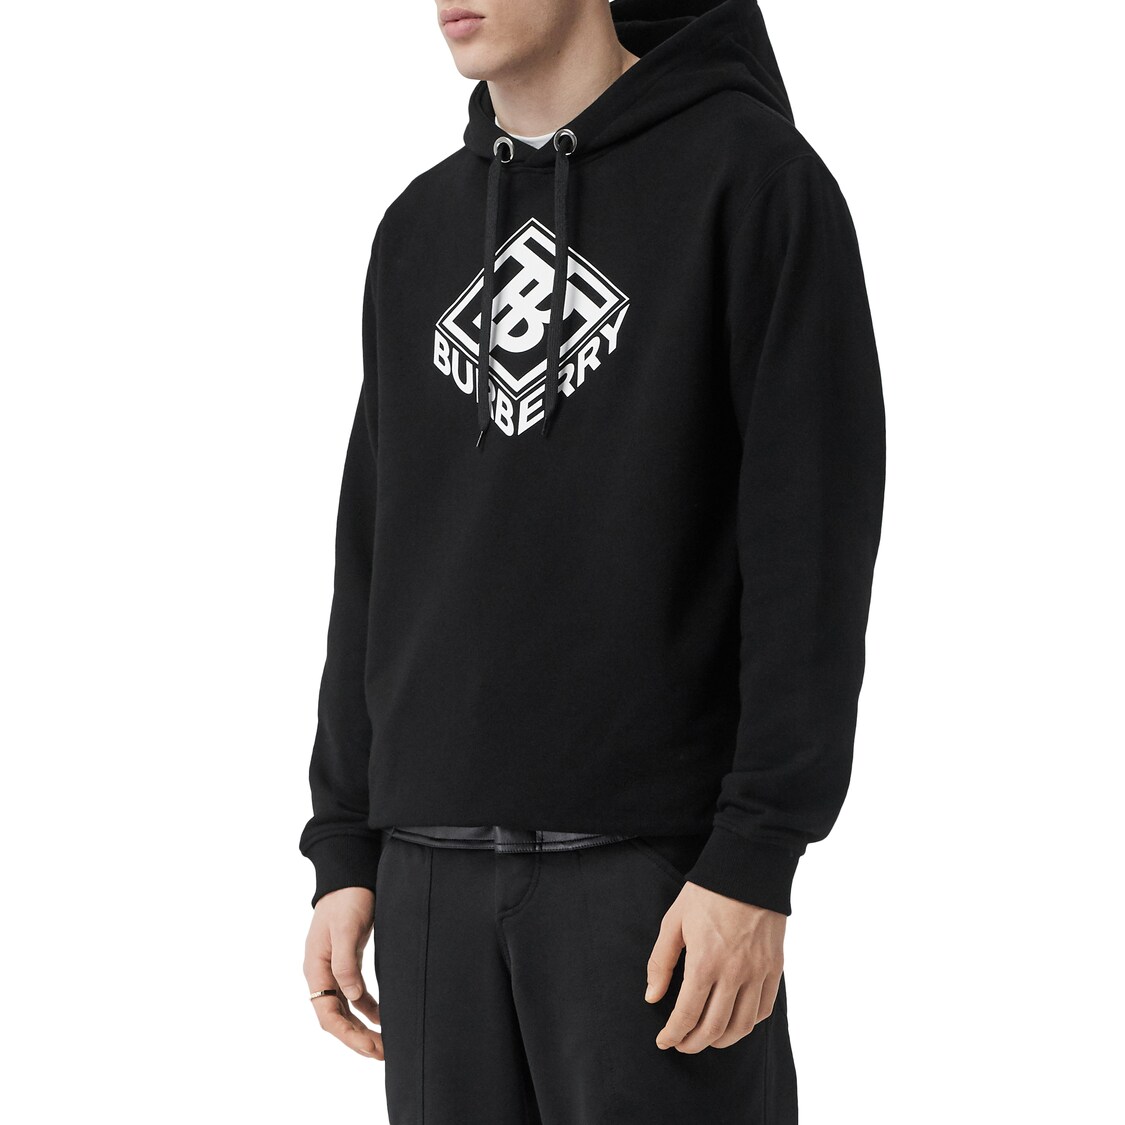 BURBERRY LOGO EMBROIDERY COTTON JERSEY HOODIE,70ILFC118-QTEXODK1